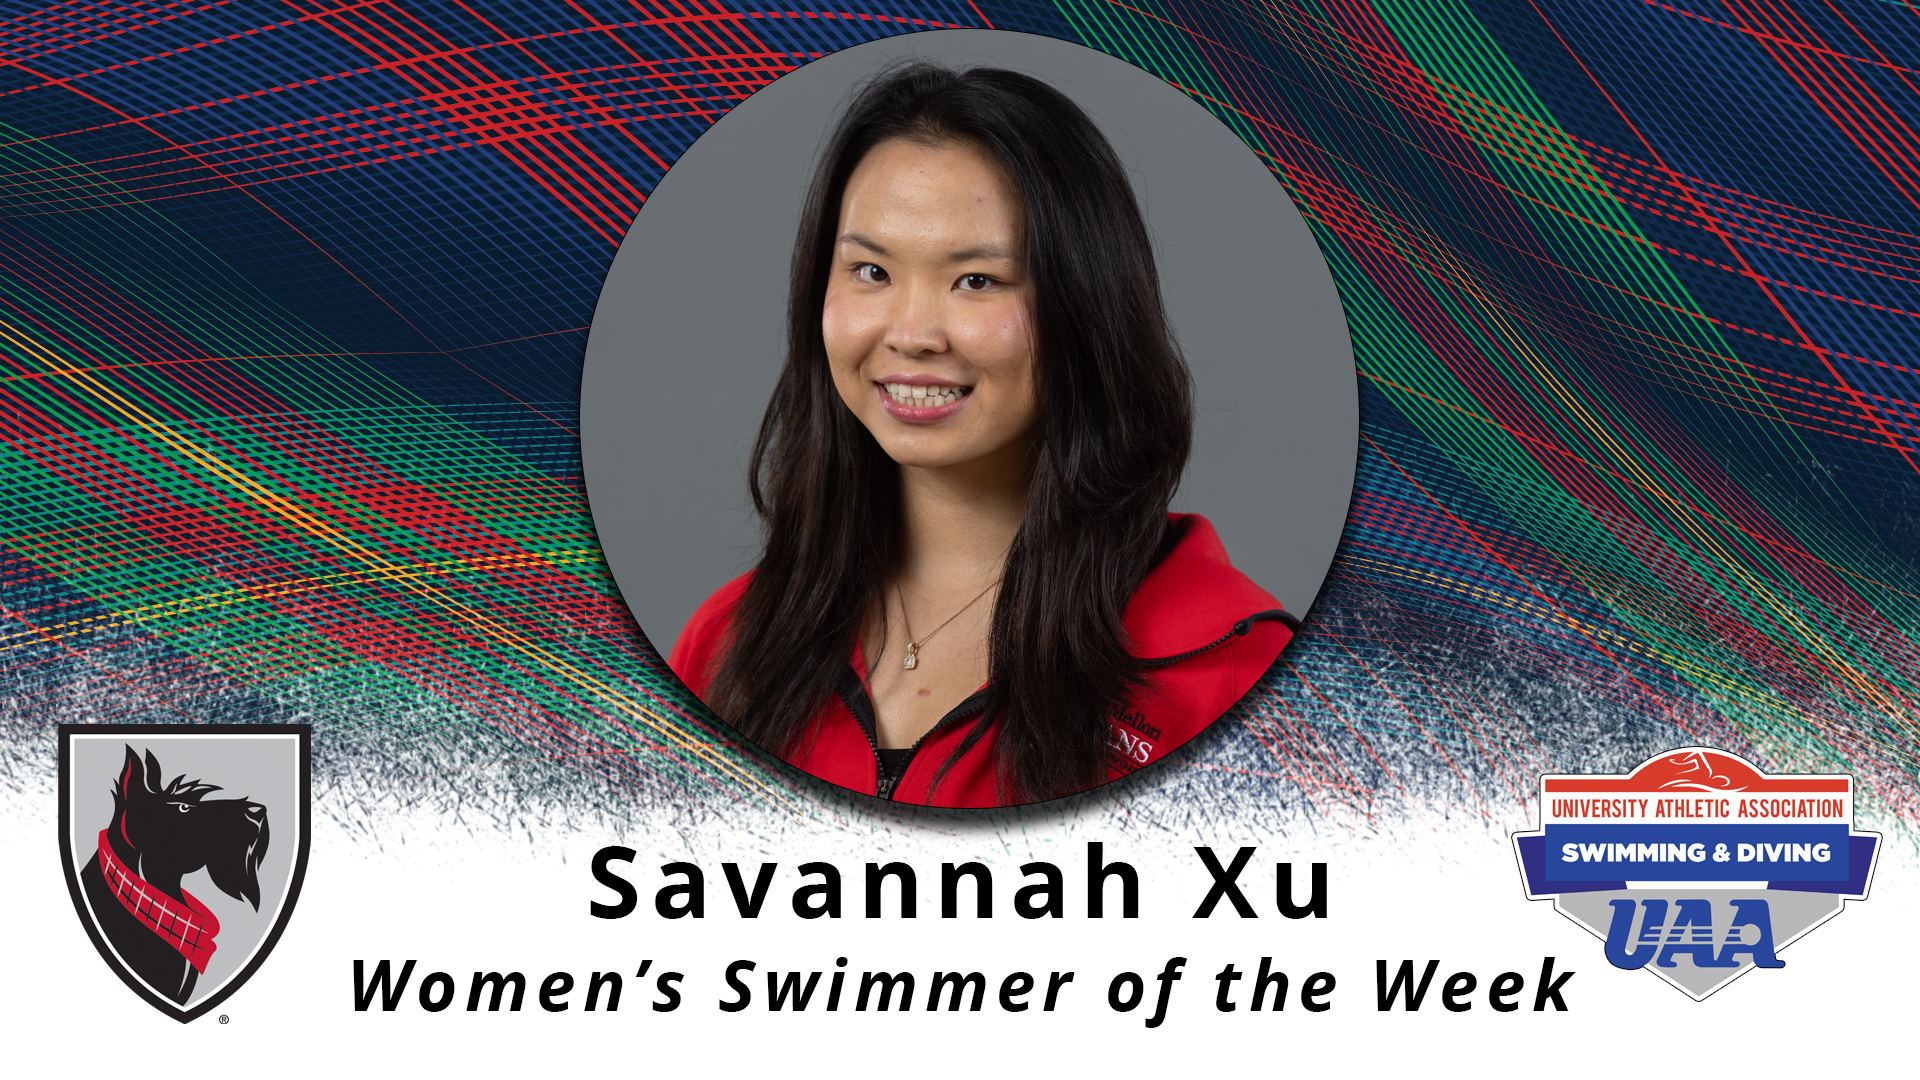 portrait of a woman in a framed circle with text reading Savannah Xu Women's Swimmer of the Week